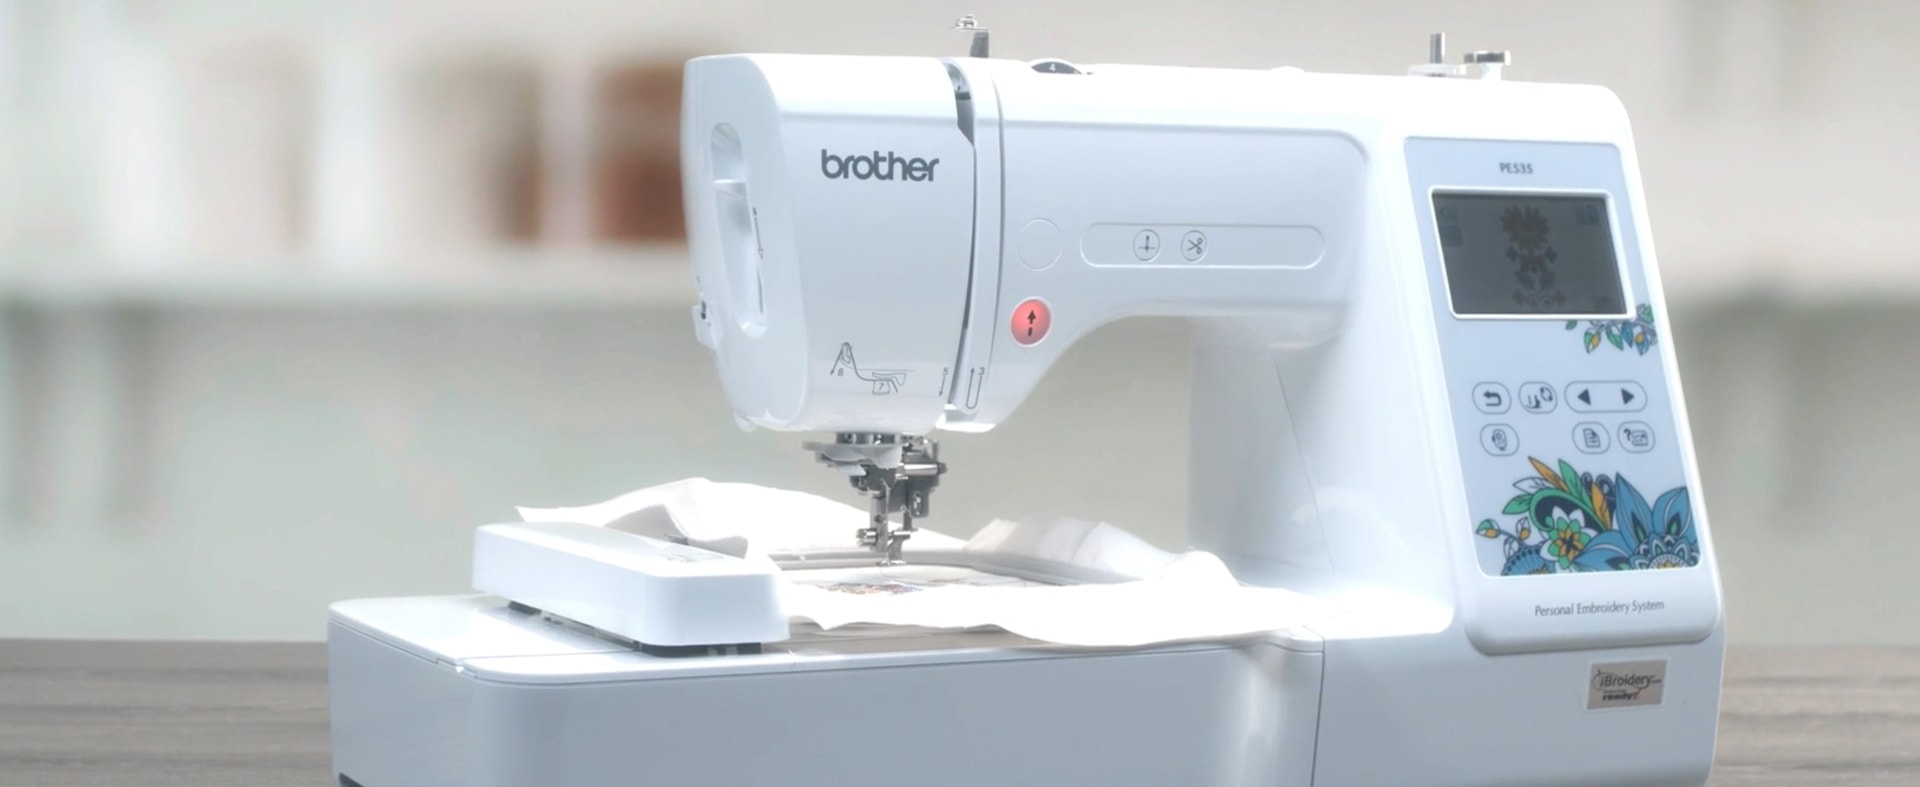 Brother pe535 embroidery machine with large color touch lcd screen Brother Pe535 4 X 4 Embroidery Machine With Large Color Touch Lcd Screen Newegg Com